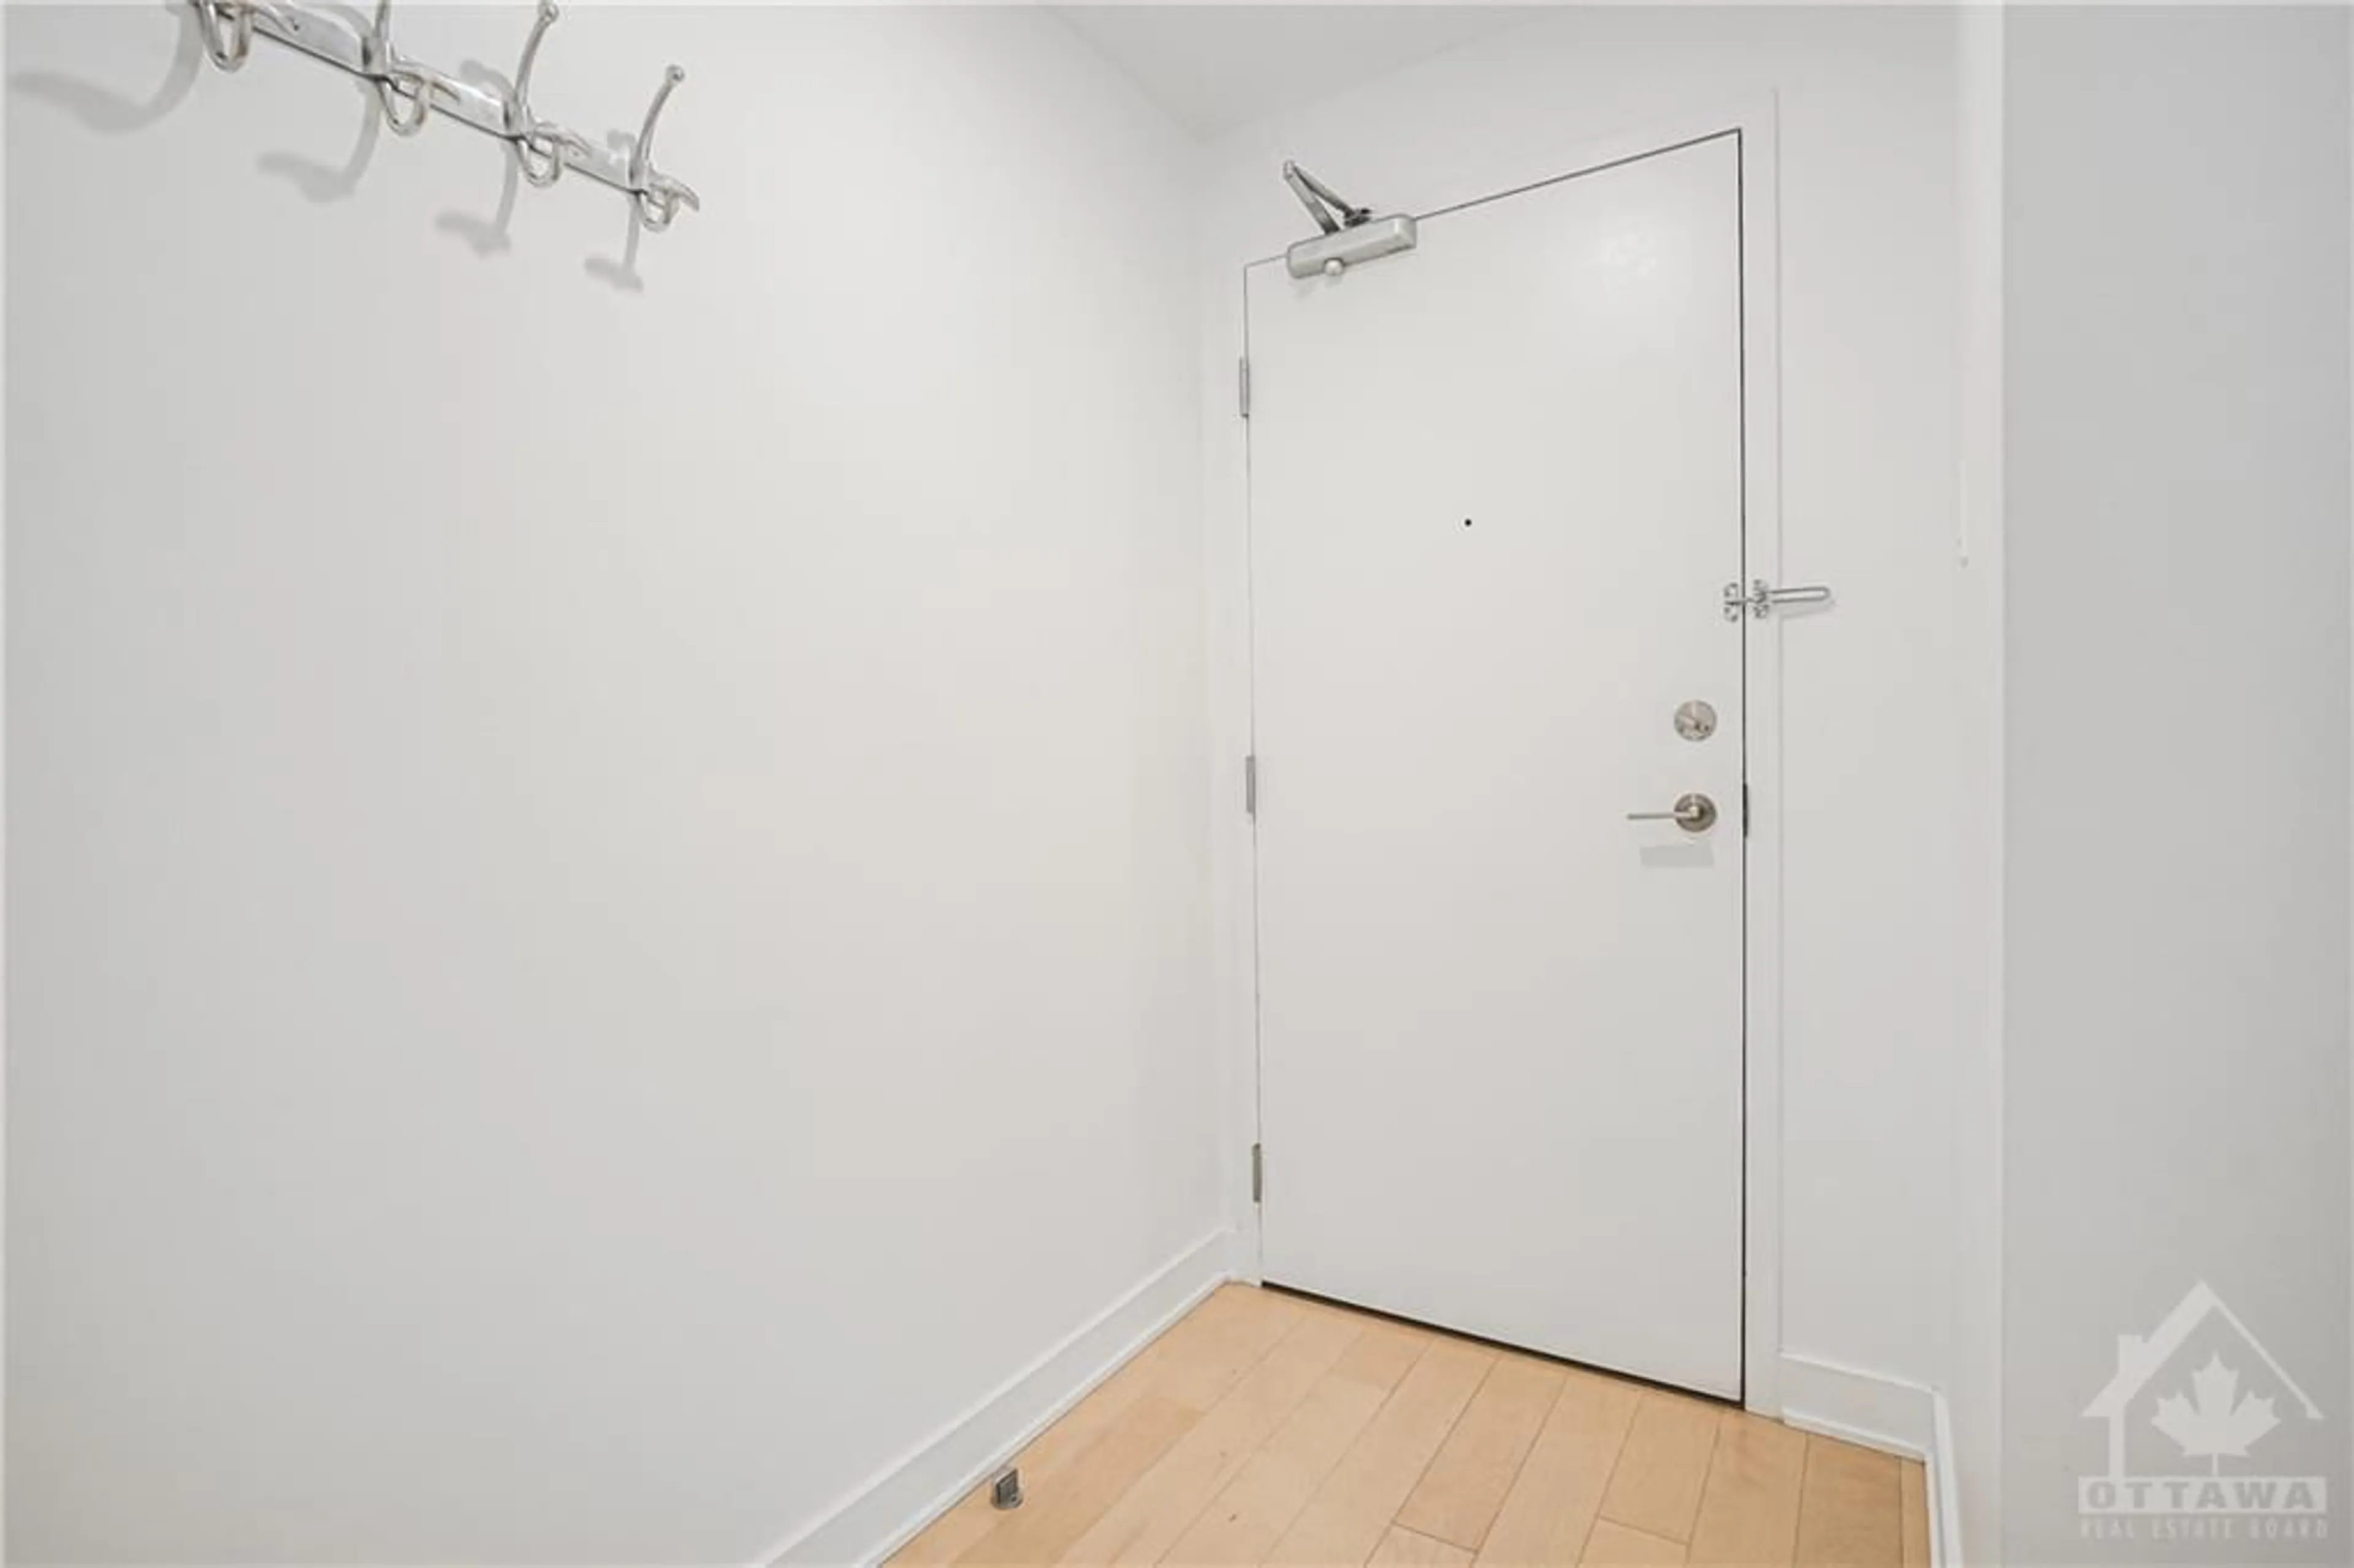 Storage room or clothes room or walk-in closet for 360 MCLEOD St #503, Ottawa Ontario K2P 1A9